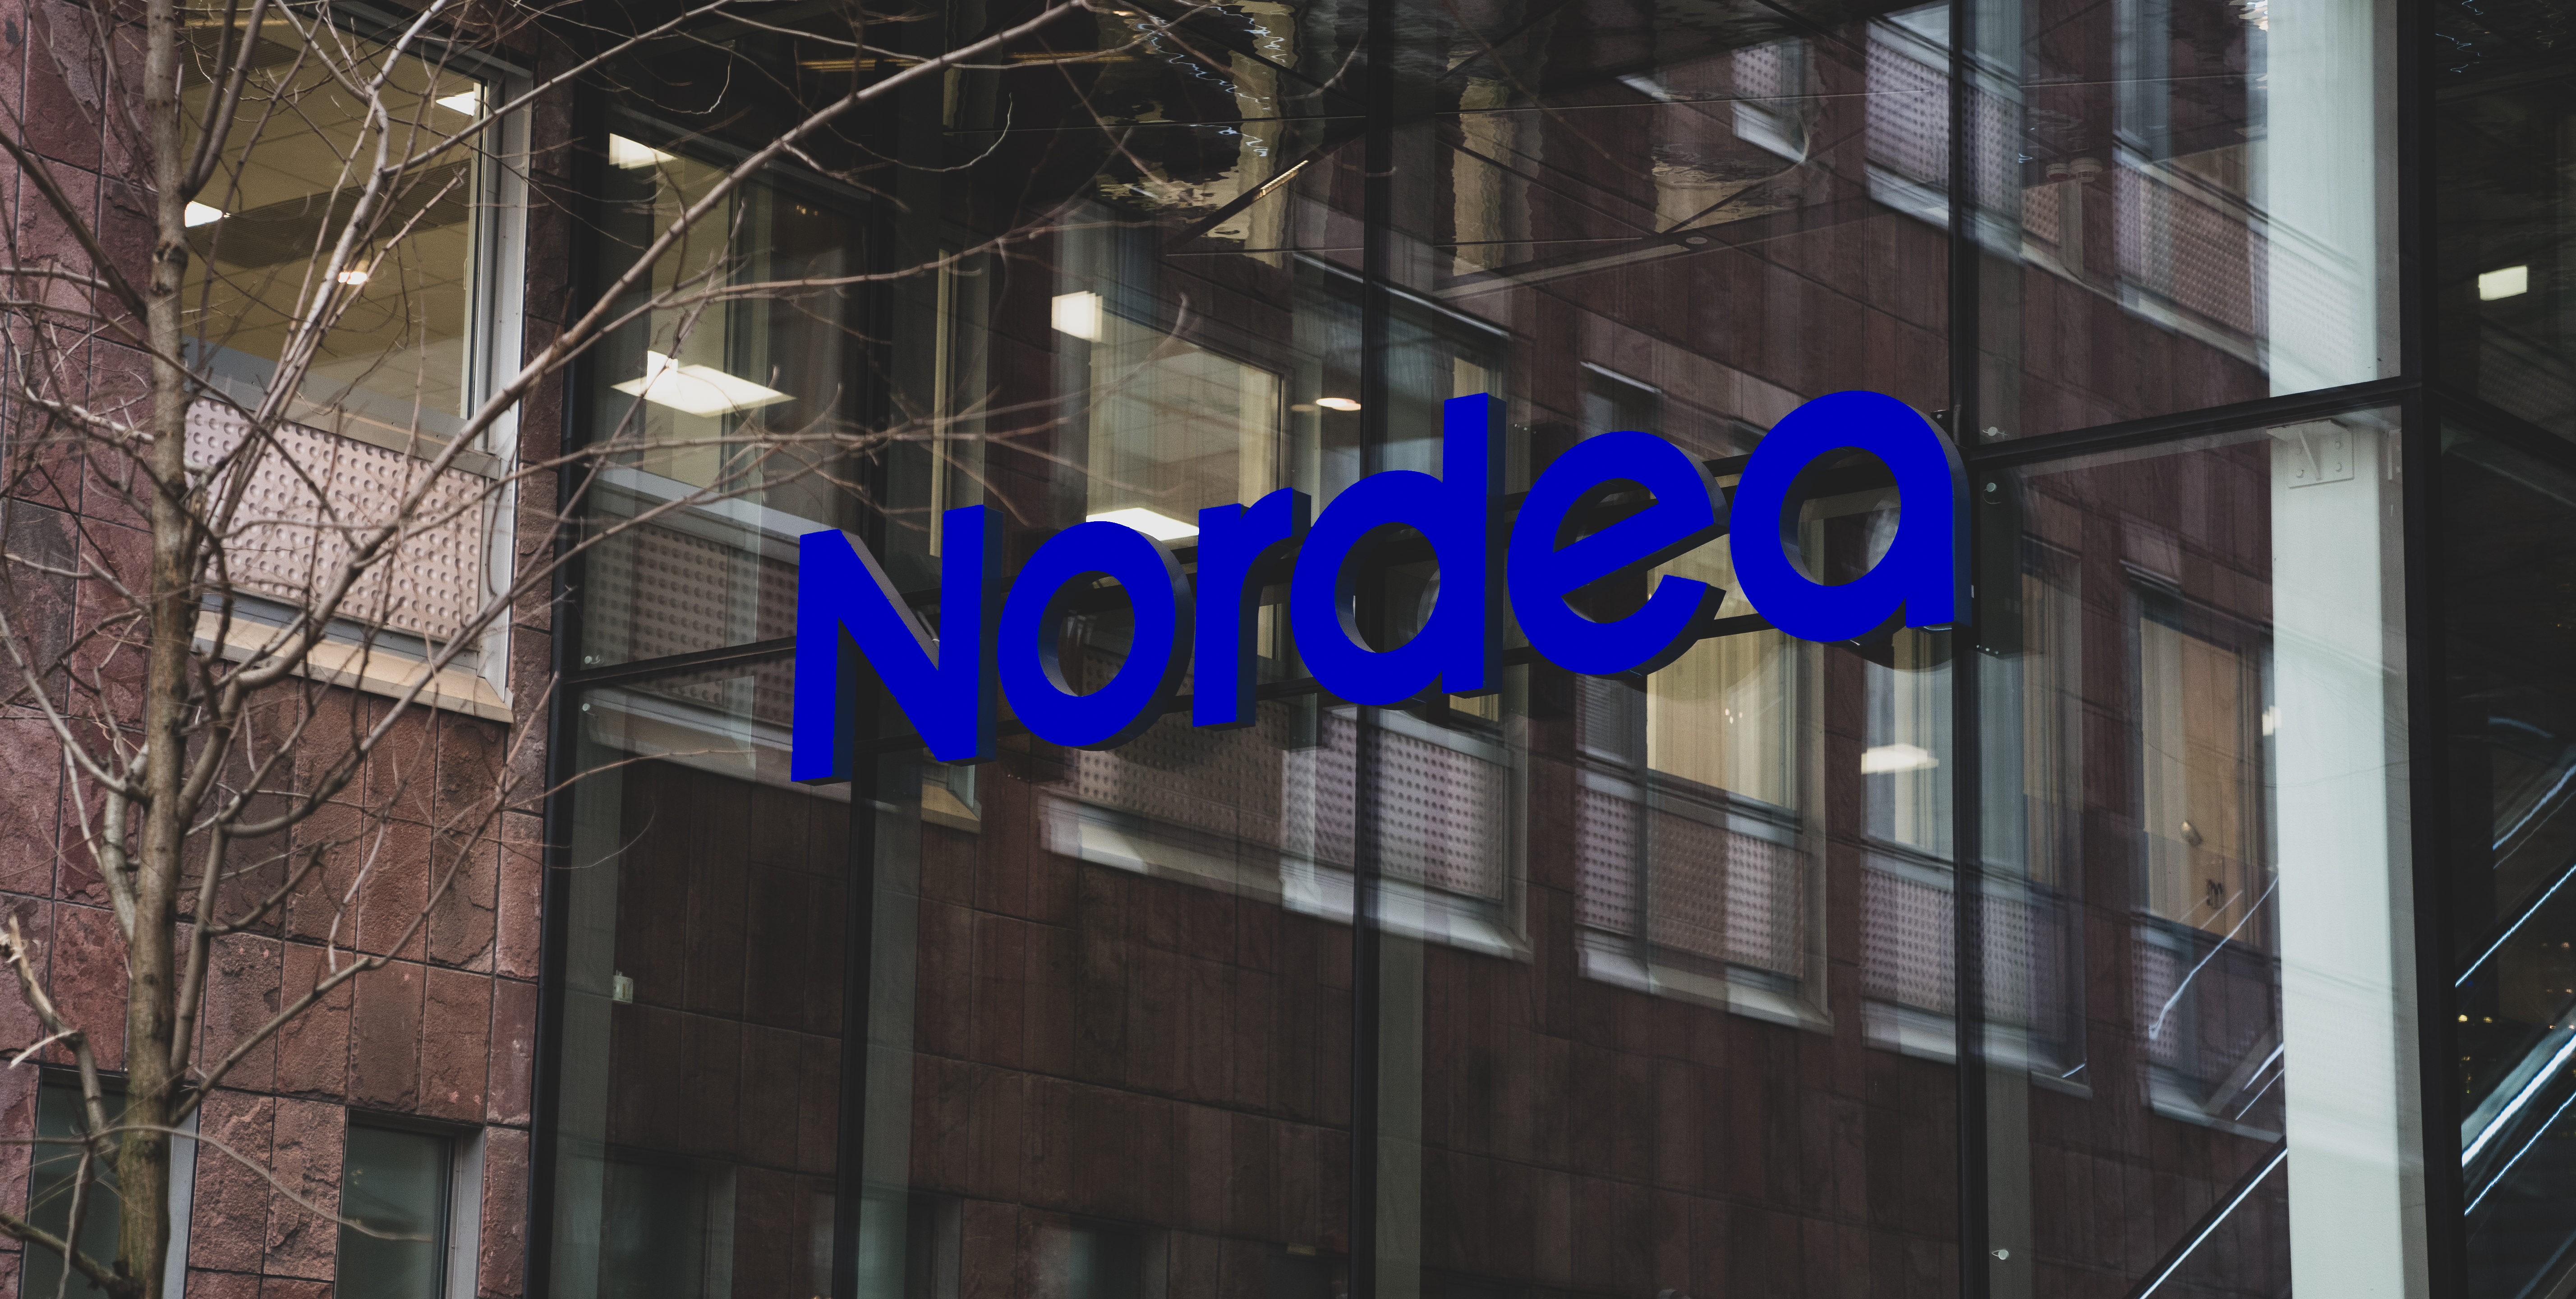 Credit Analyst / Senior Credit Analyst - Financial Institutions and Countries, Nordea Estonia